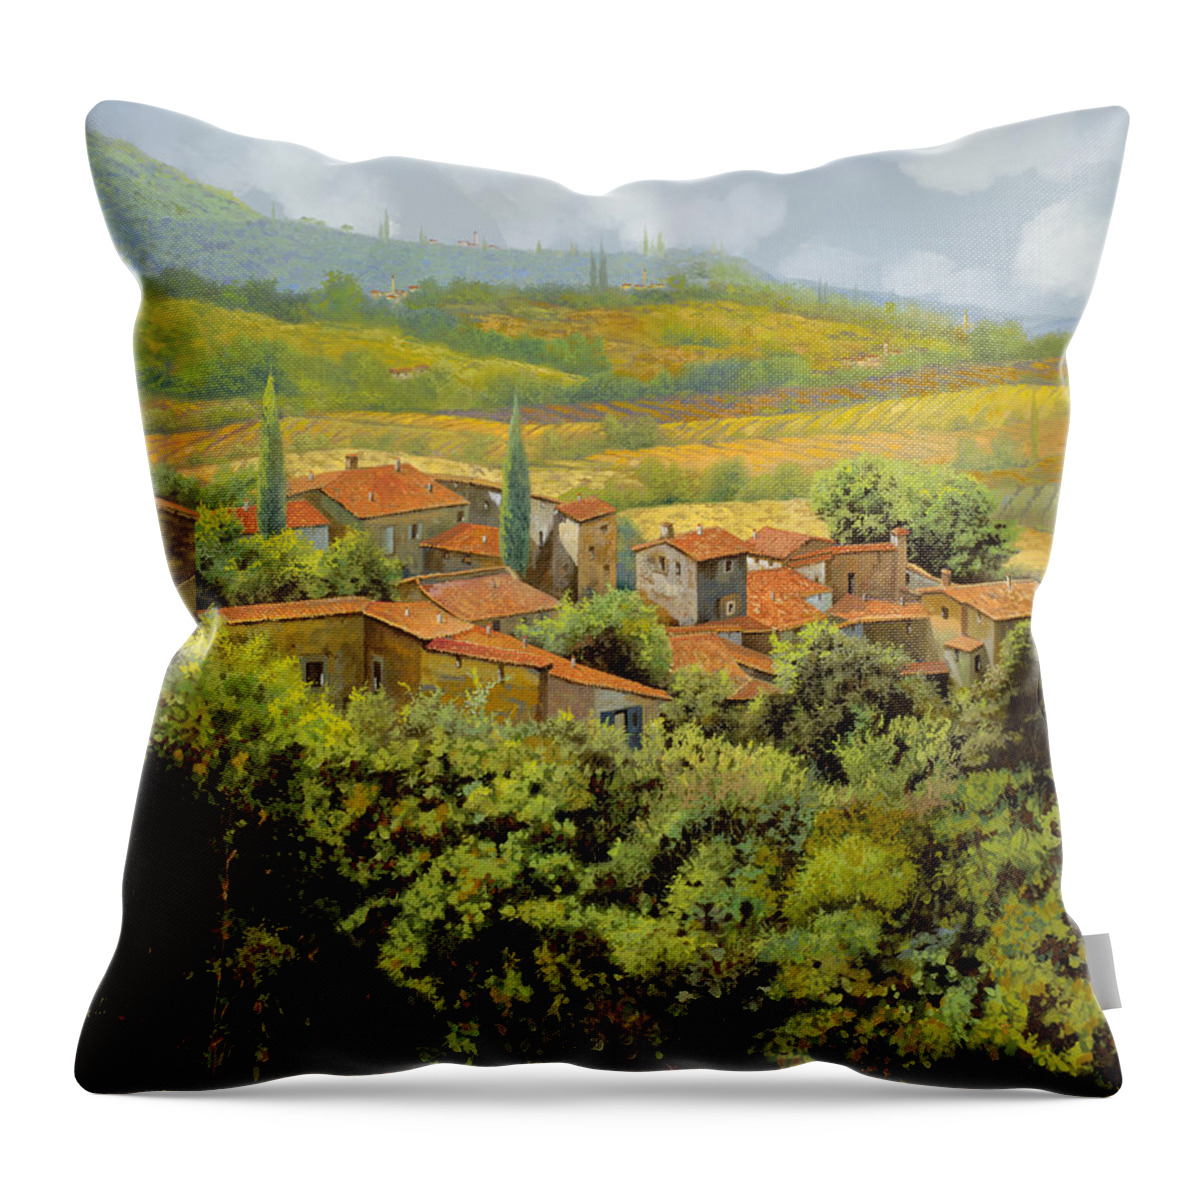 Tuscany Throw Pillow featuring the painting Paesaggio Toscano by Guido Borelli